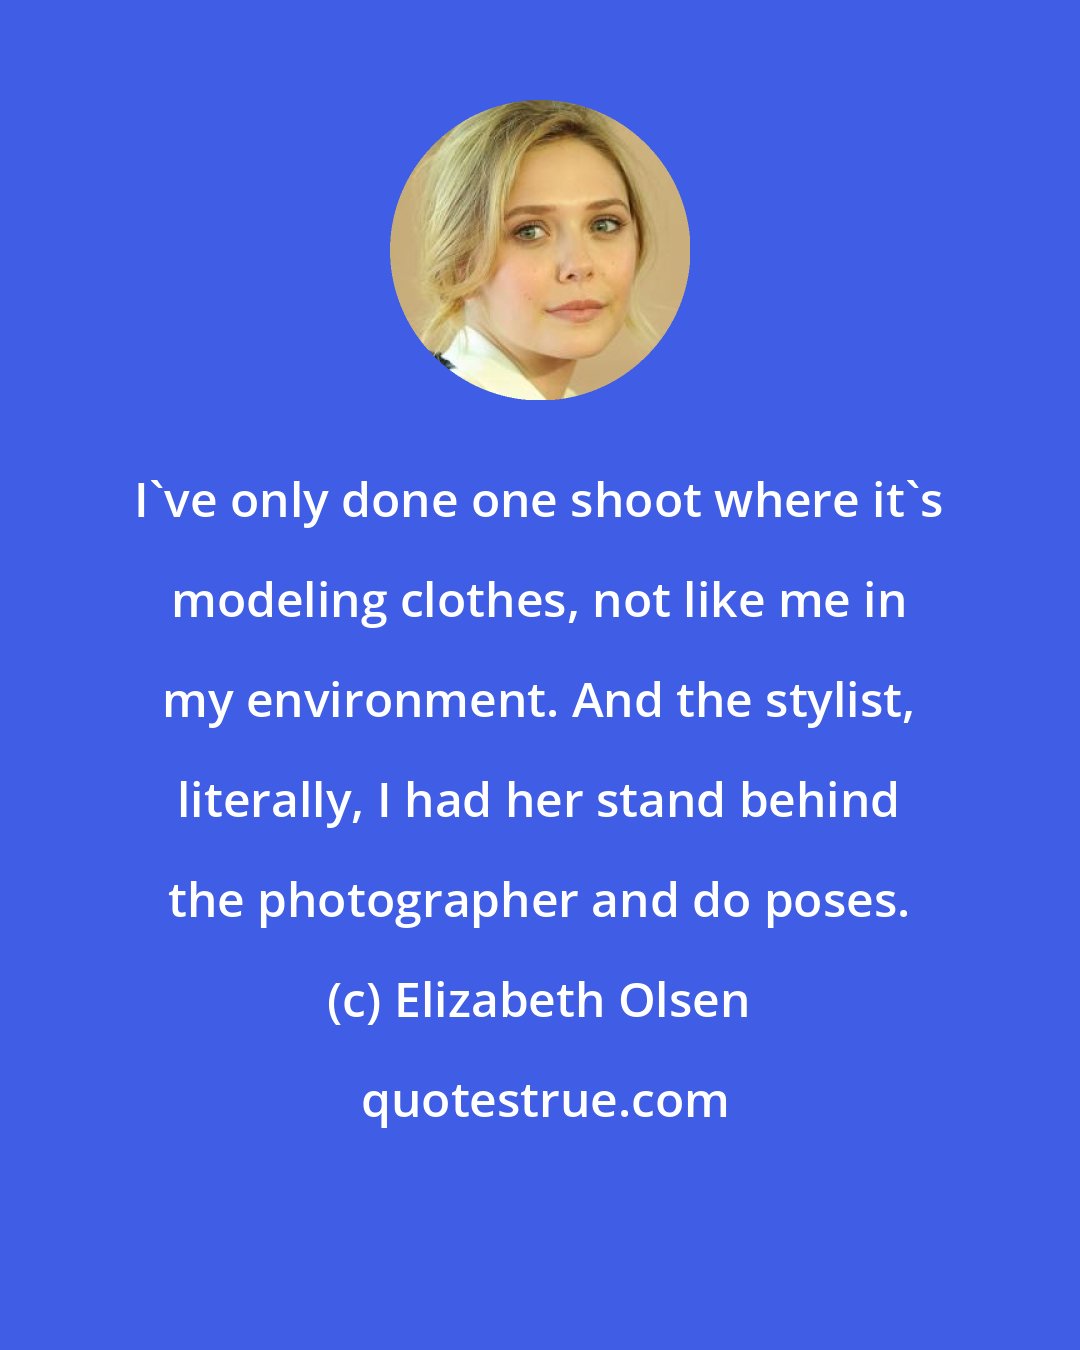 Elizabeth Olsen: I've only done one shoot where it's modeling clothes, not like me in my environment. And the stylist, literally, I had her stand behind the photographer and do poses.